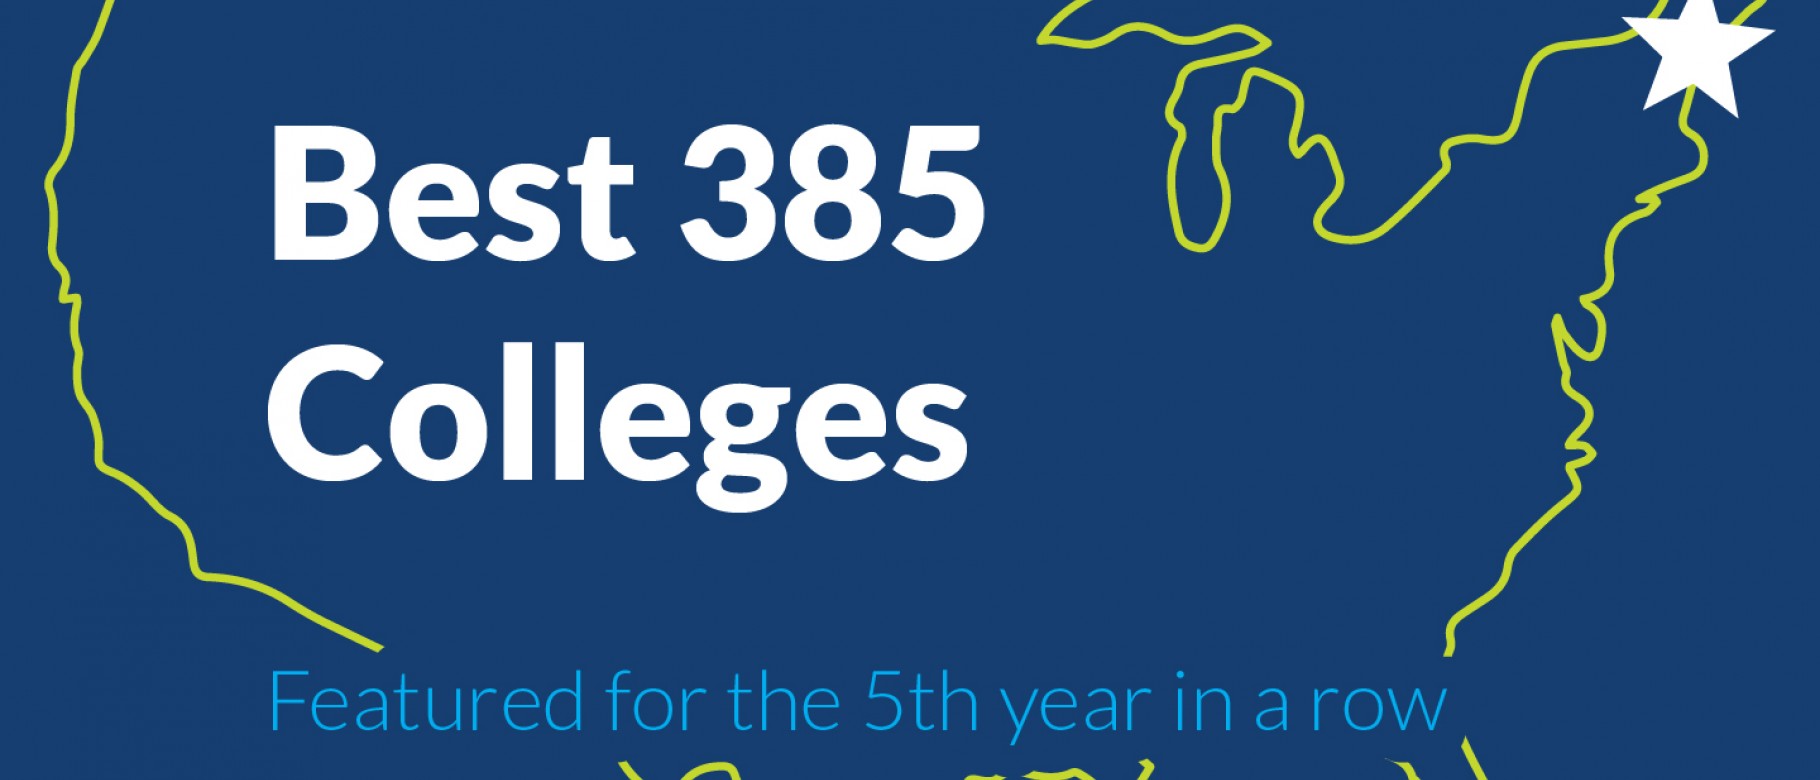 Princeton Review Best 385 Colleges graphic 